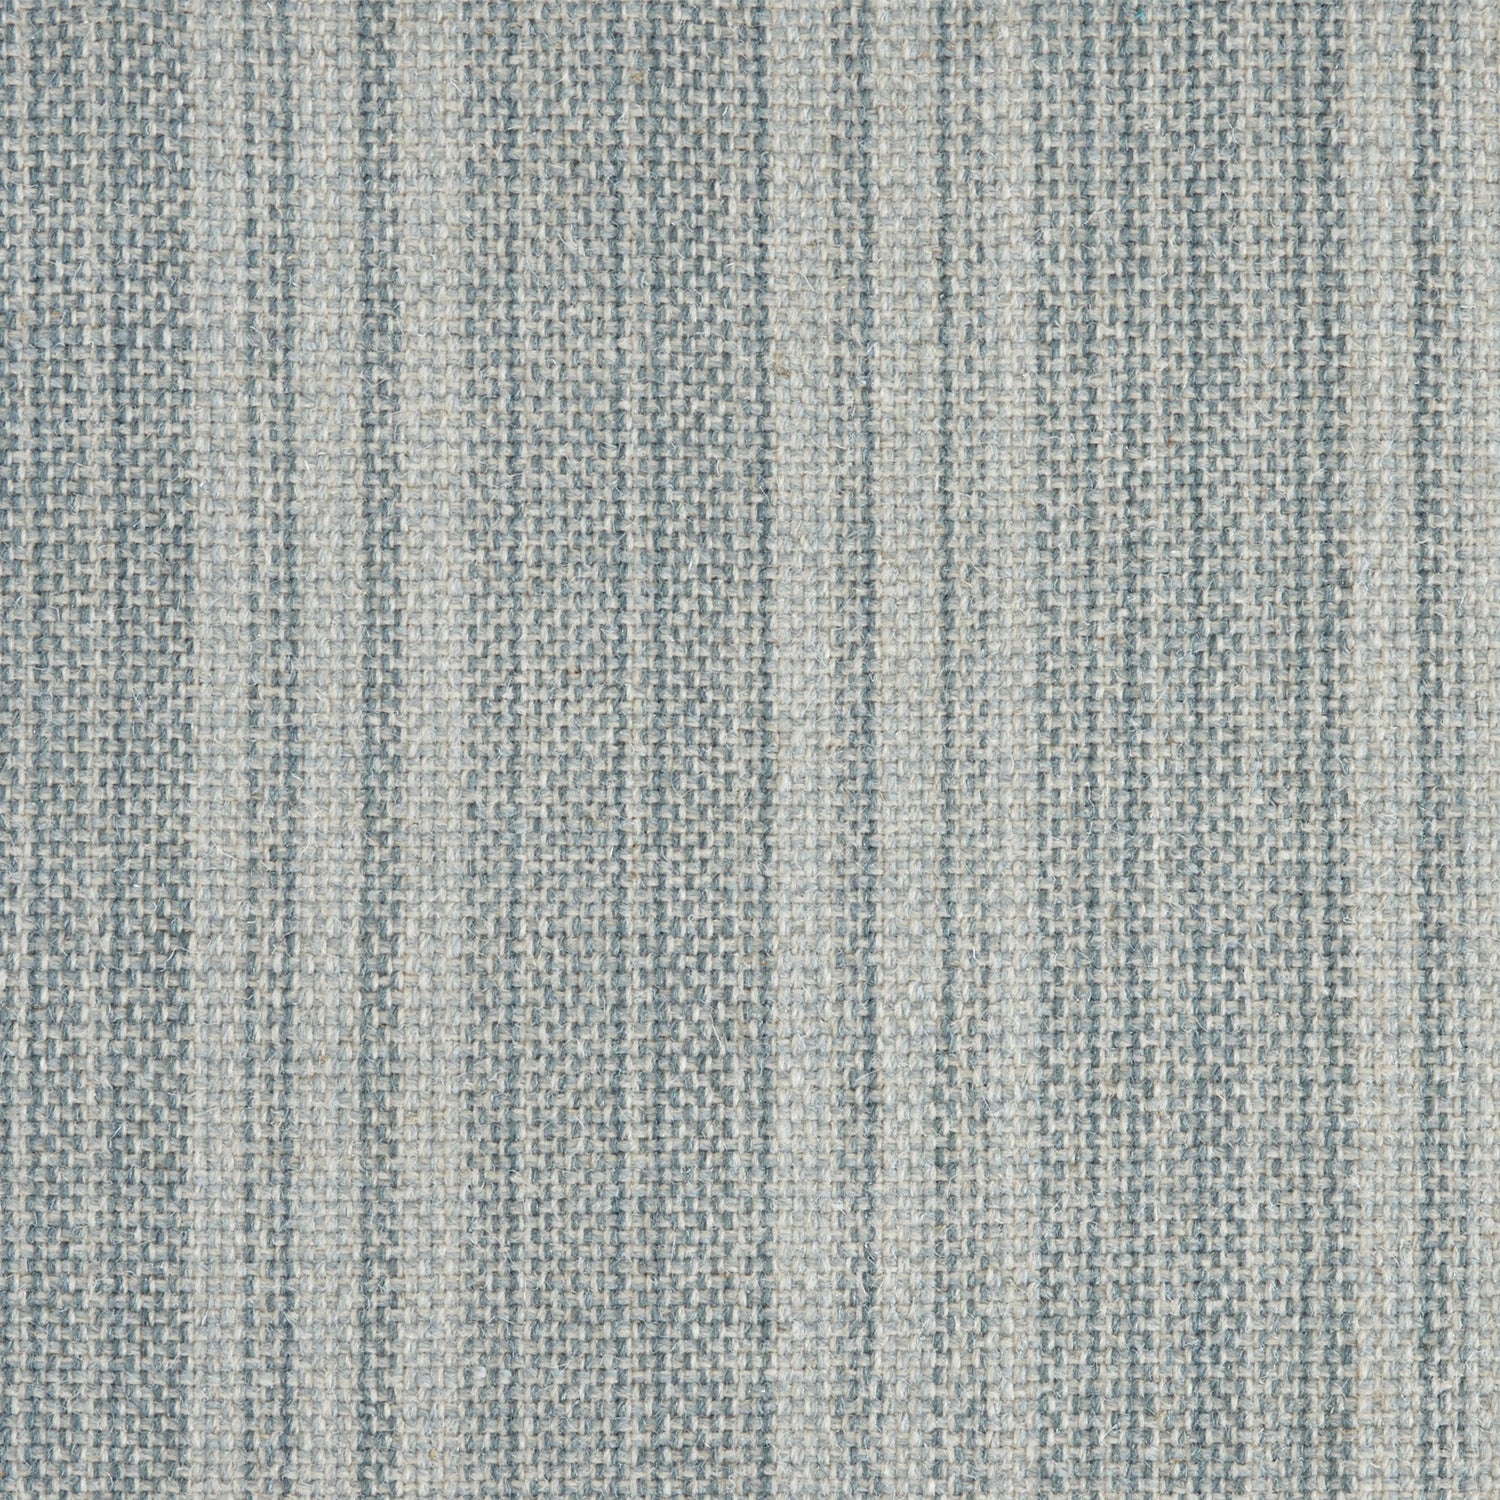 Wool broadloom carpet swatch in a light blue colorway mottled with gray and blue fibers.